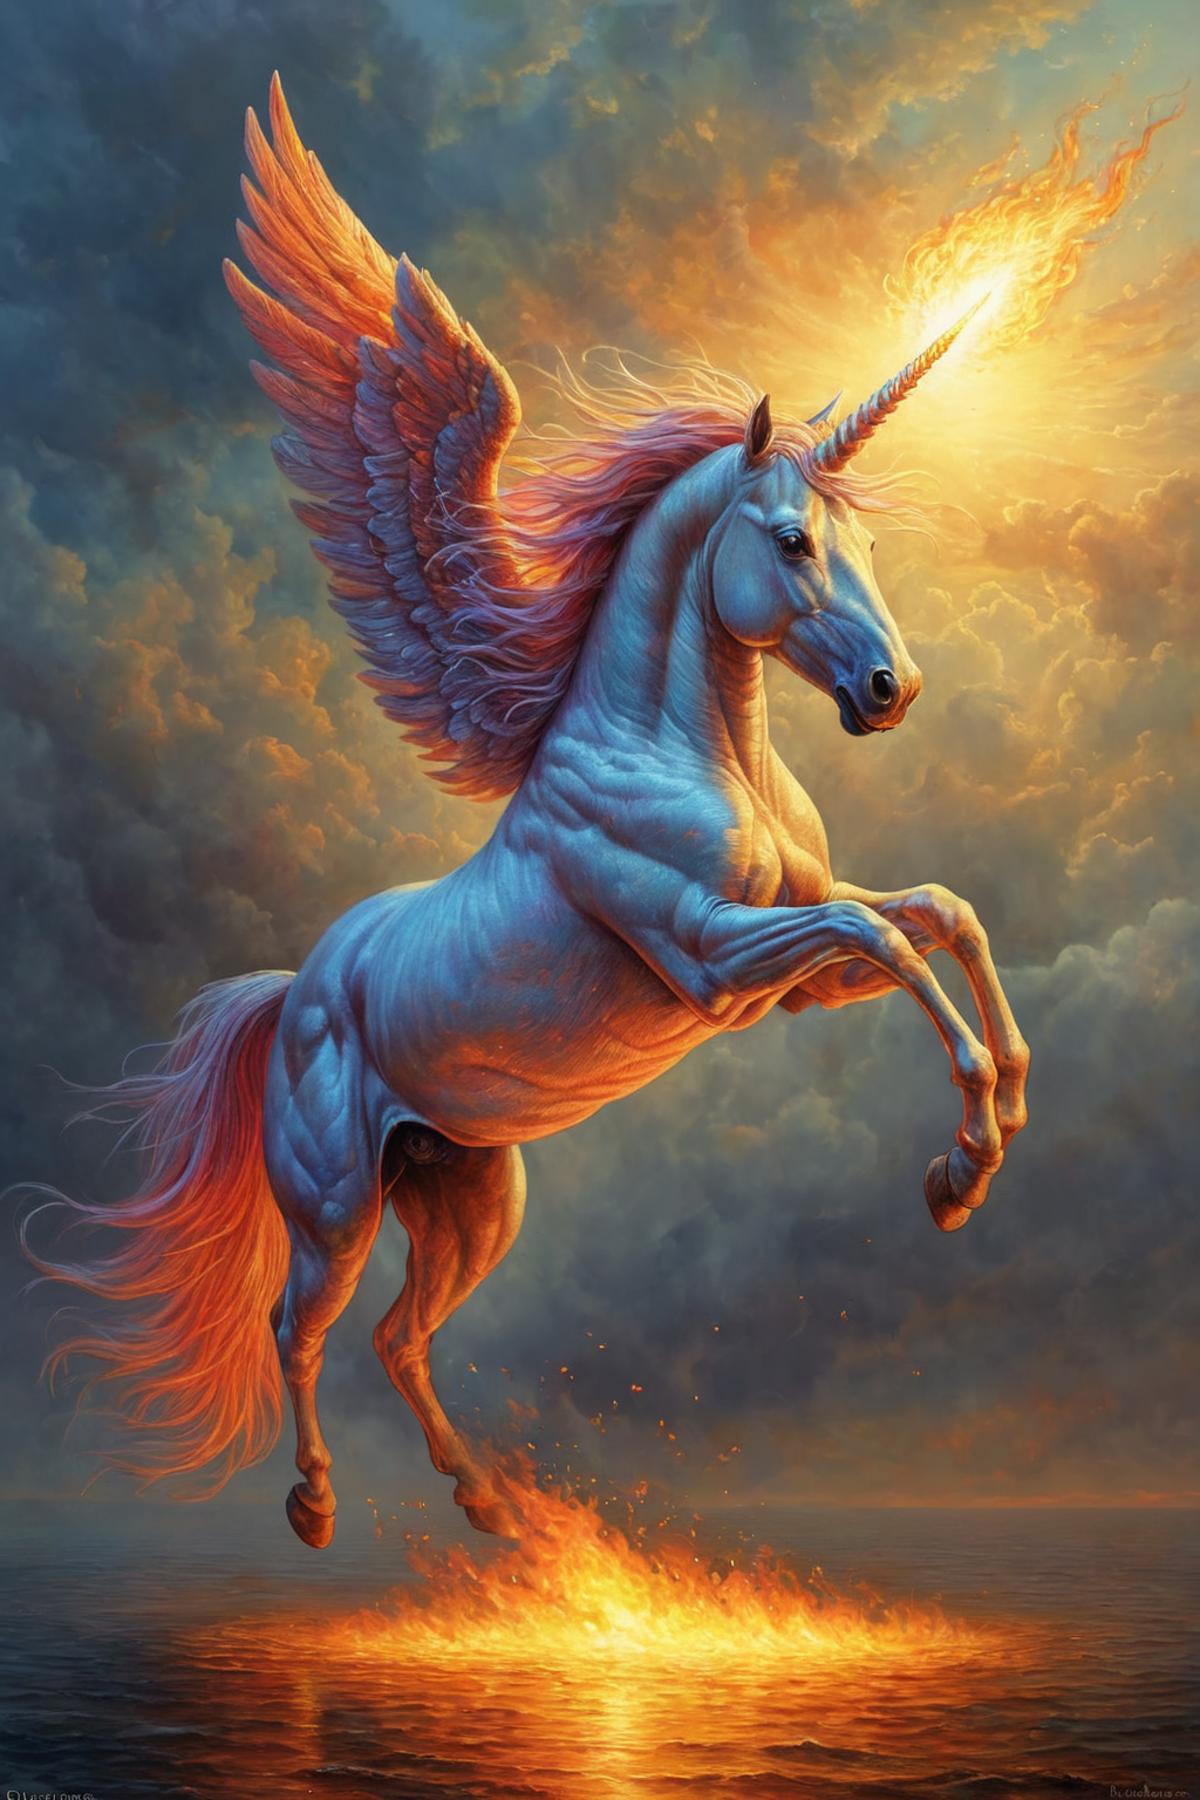 Artistic Illustration of a Blue and White Unicorn with Red Tail and Wings and a Sunbeam Above Its Head.